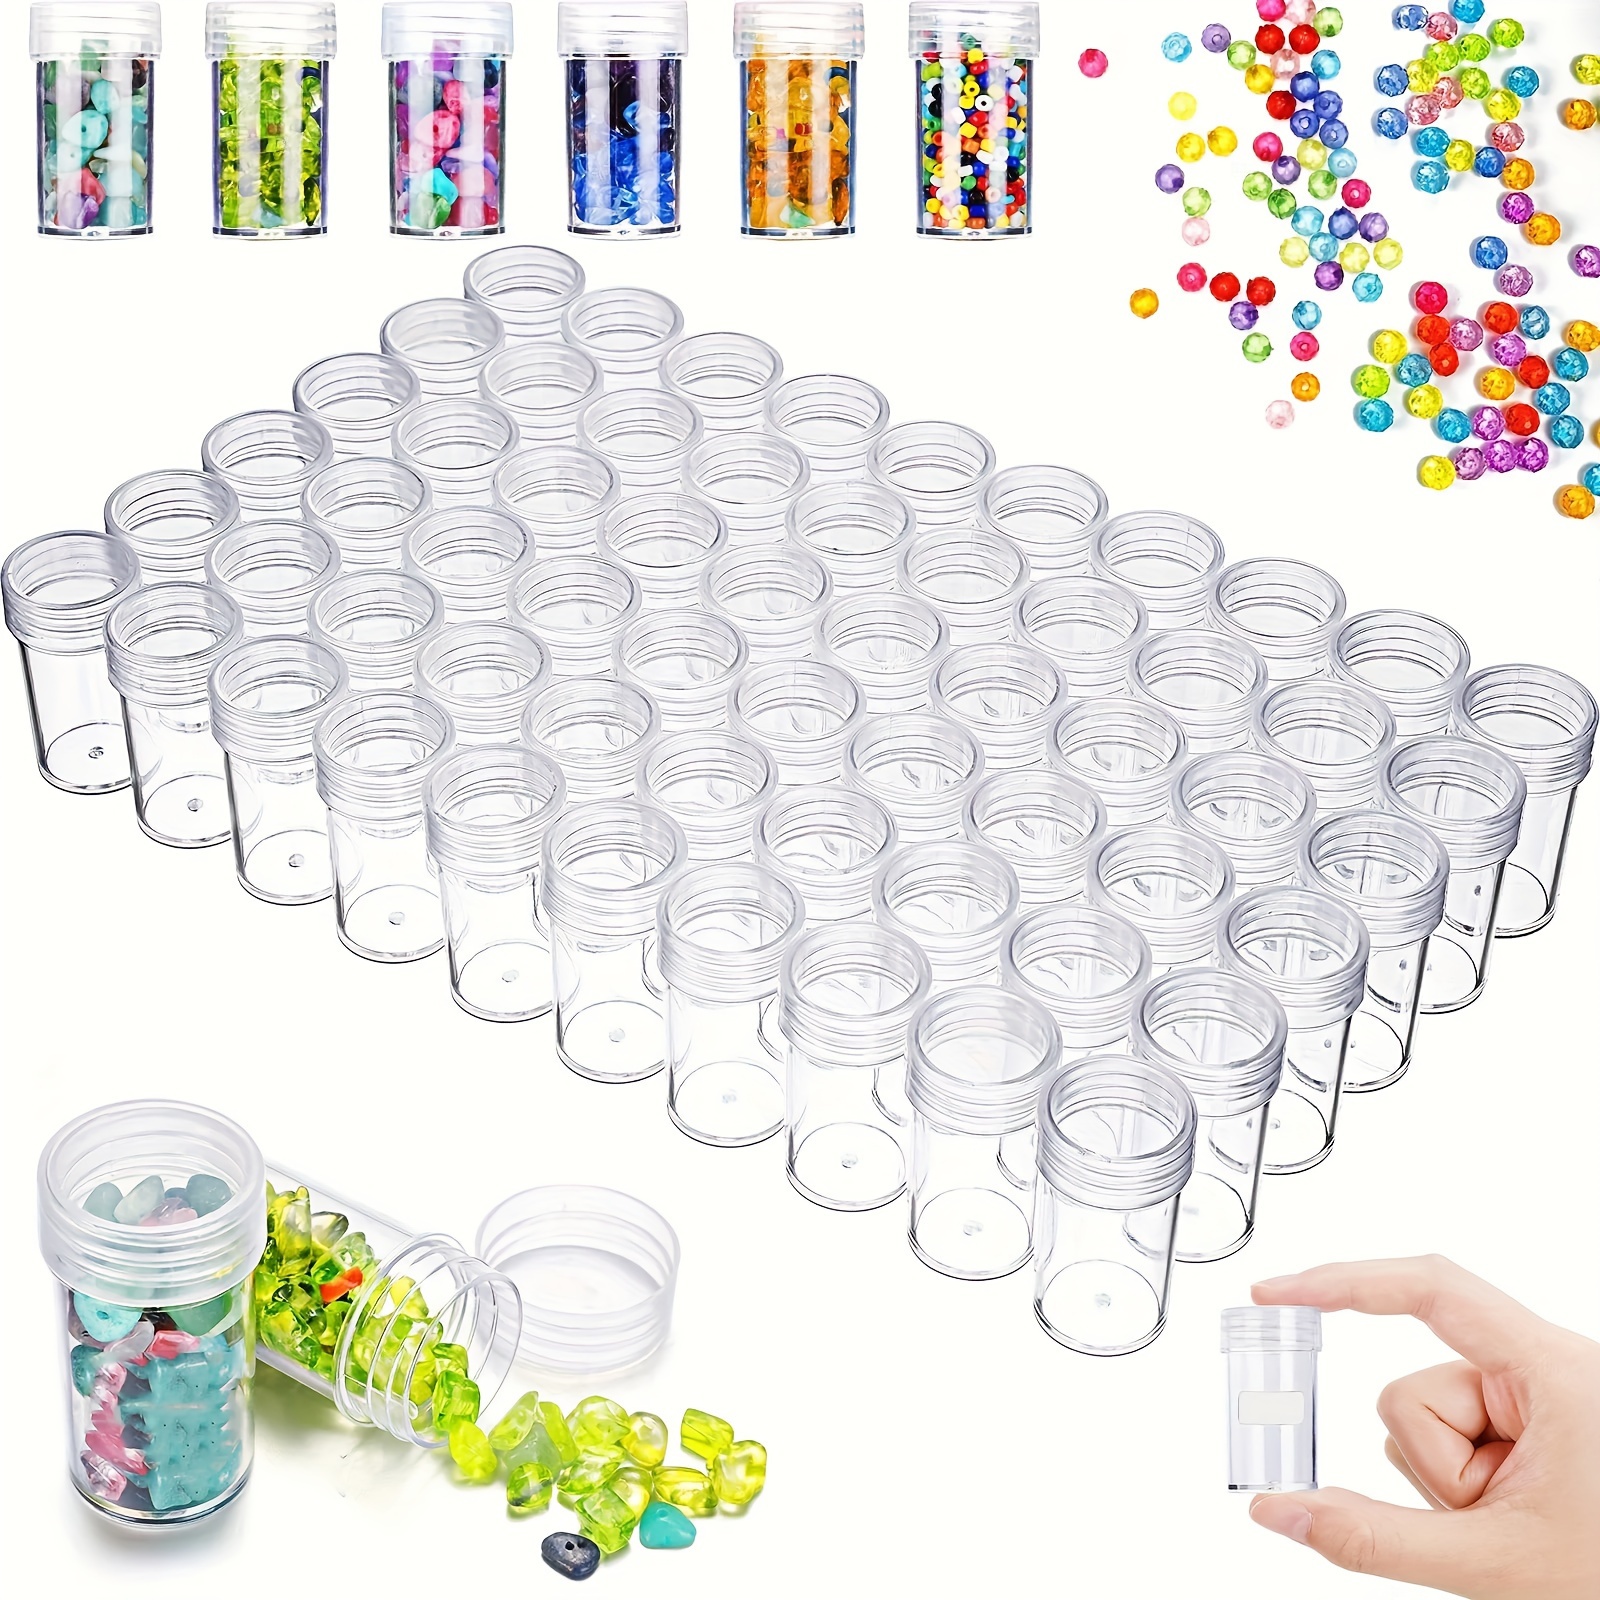 BENECREAT 18 PACK Rectangle Clear Plastic Bead Storage Containers Box Case  with lid for Items, Earplugs, Pills, Tiny Findings - 2.5x1.73x0.78 Inches 